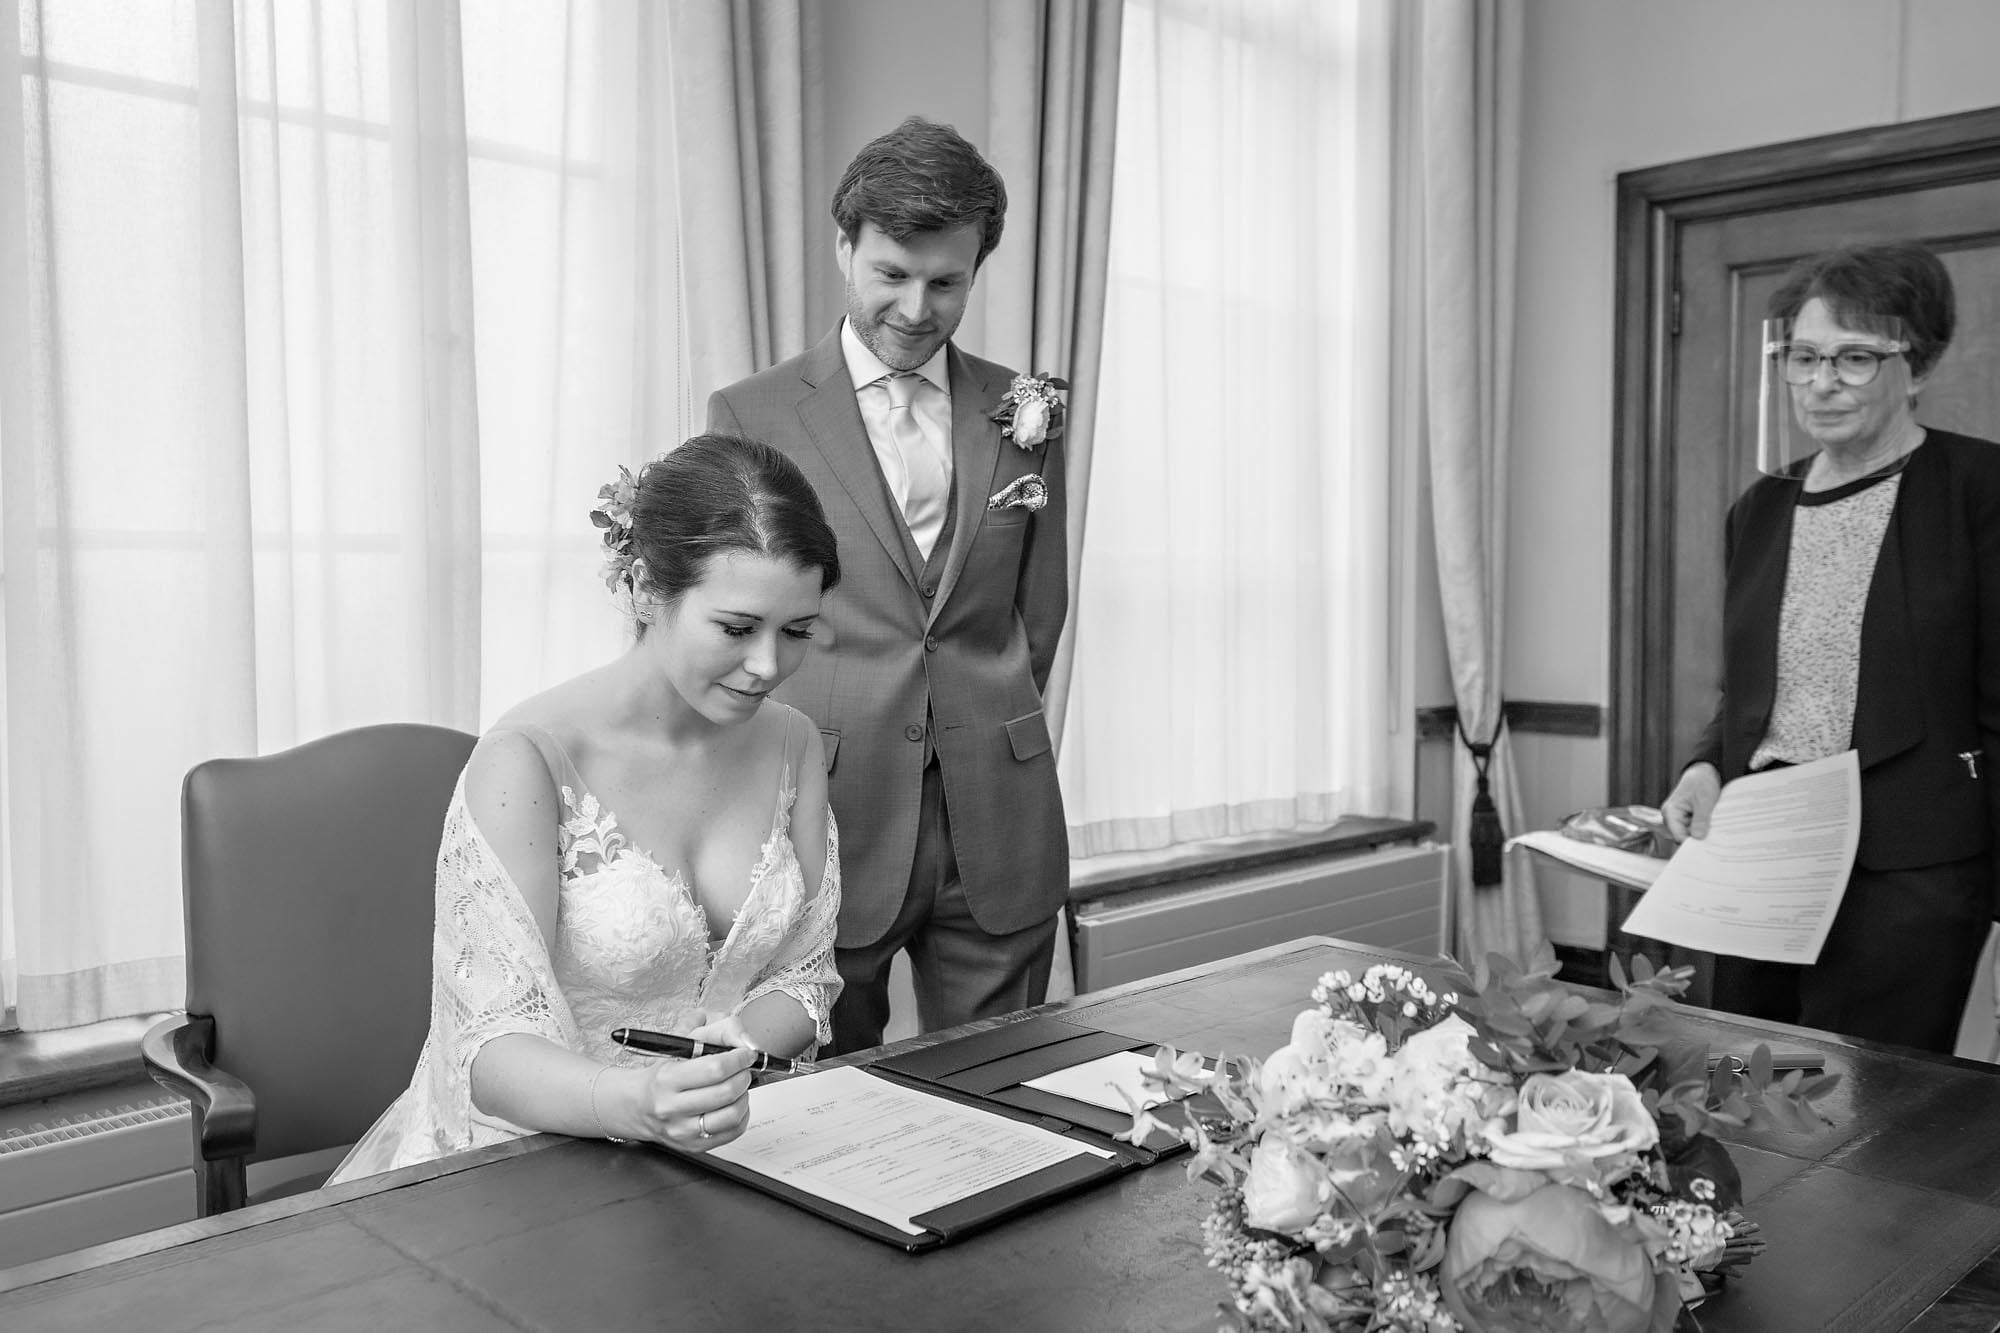 The bride signs her wedding schedule whilst the groom watches on